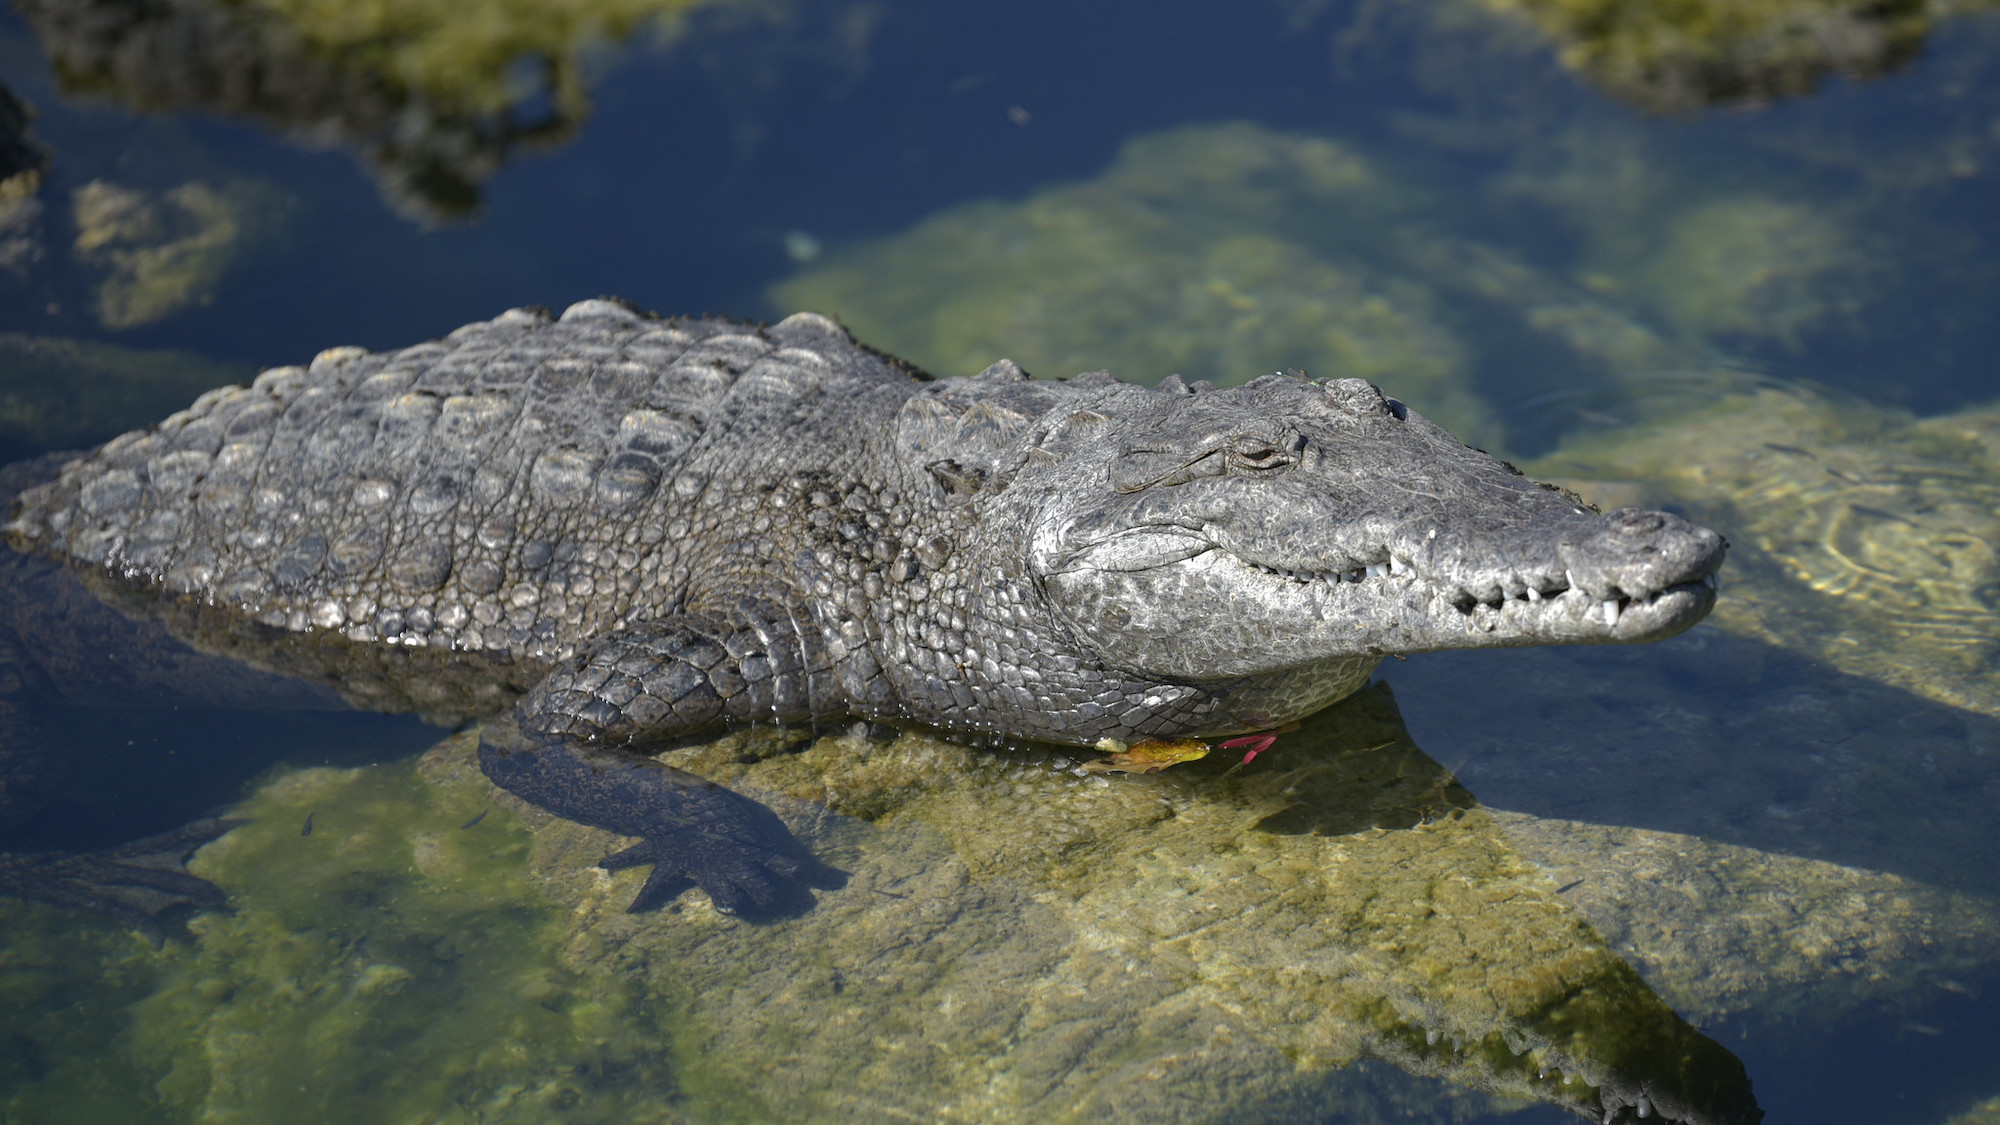 Crocodile Gives “Virgin Birth” After 16 Years of Isolation